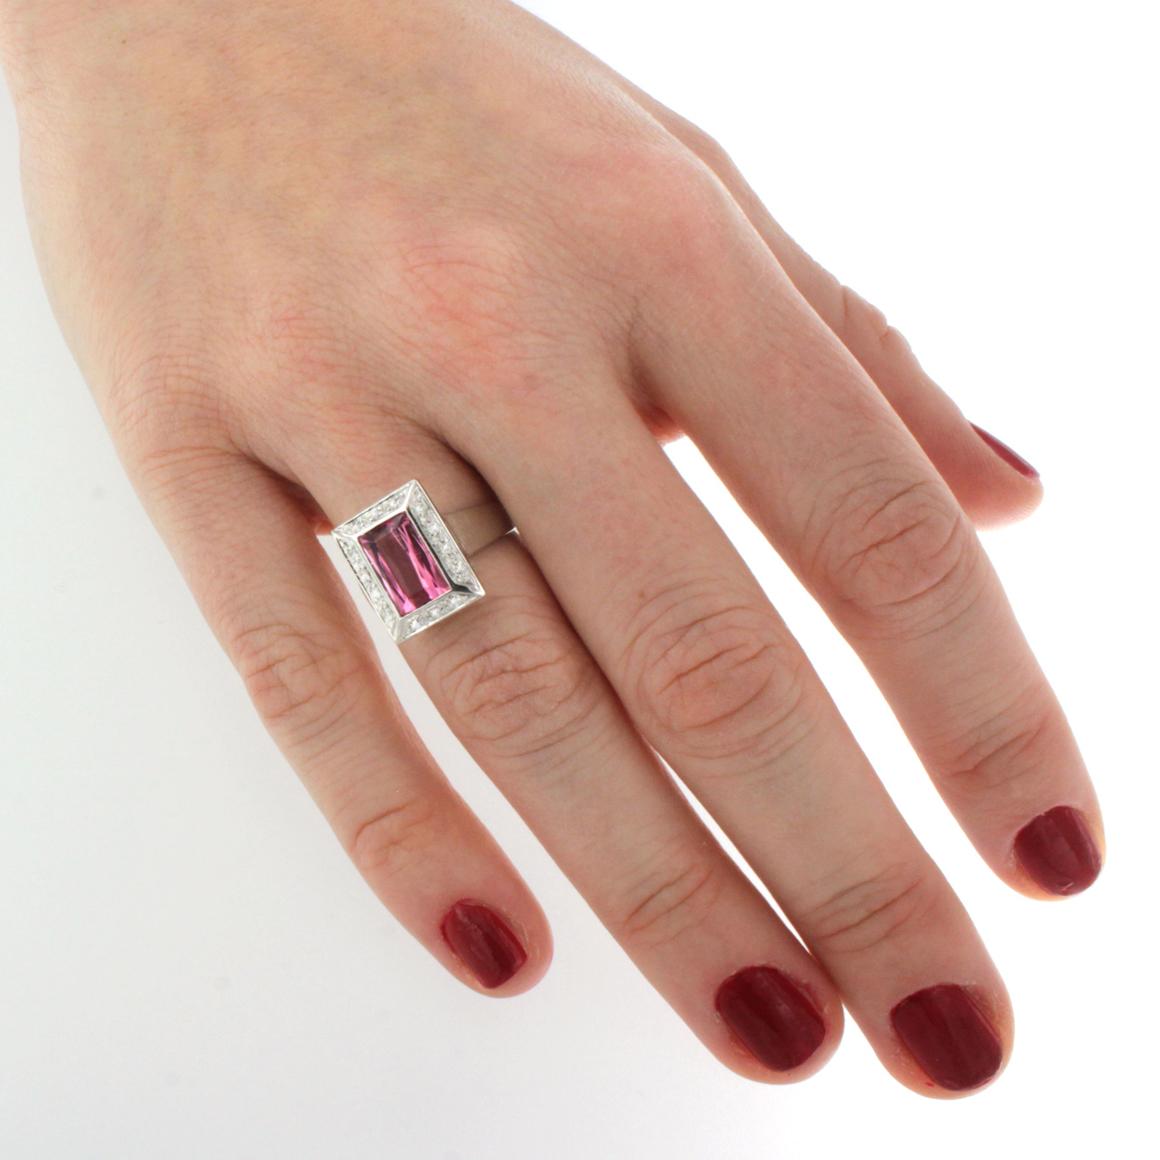 Super colour of Pink Tourmaline and white diamonds for this classic and trandy Ring in White gold 18kt  and white Diamonds cts 0.15 VS colour G/H.   Tourmaline size mm 6x10    g.5,70

Size of Ring : EU MIS 13   /  USA 7   


All Stanoppi Jewelry is